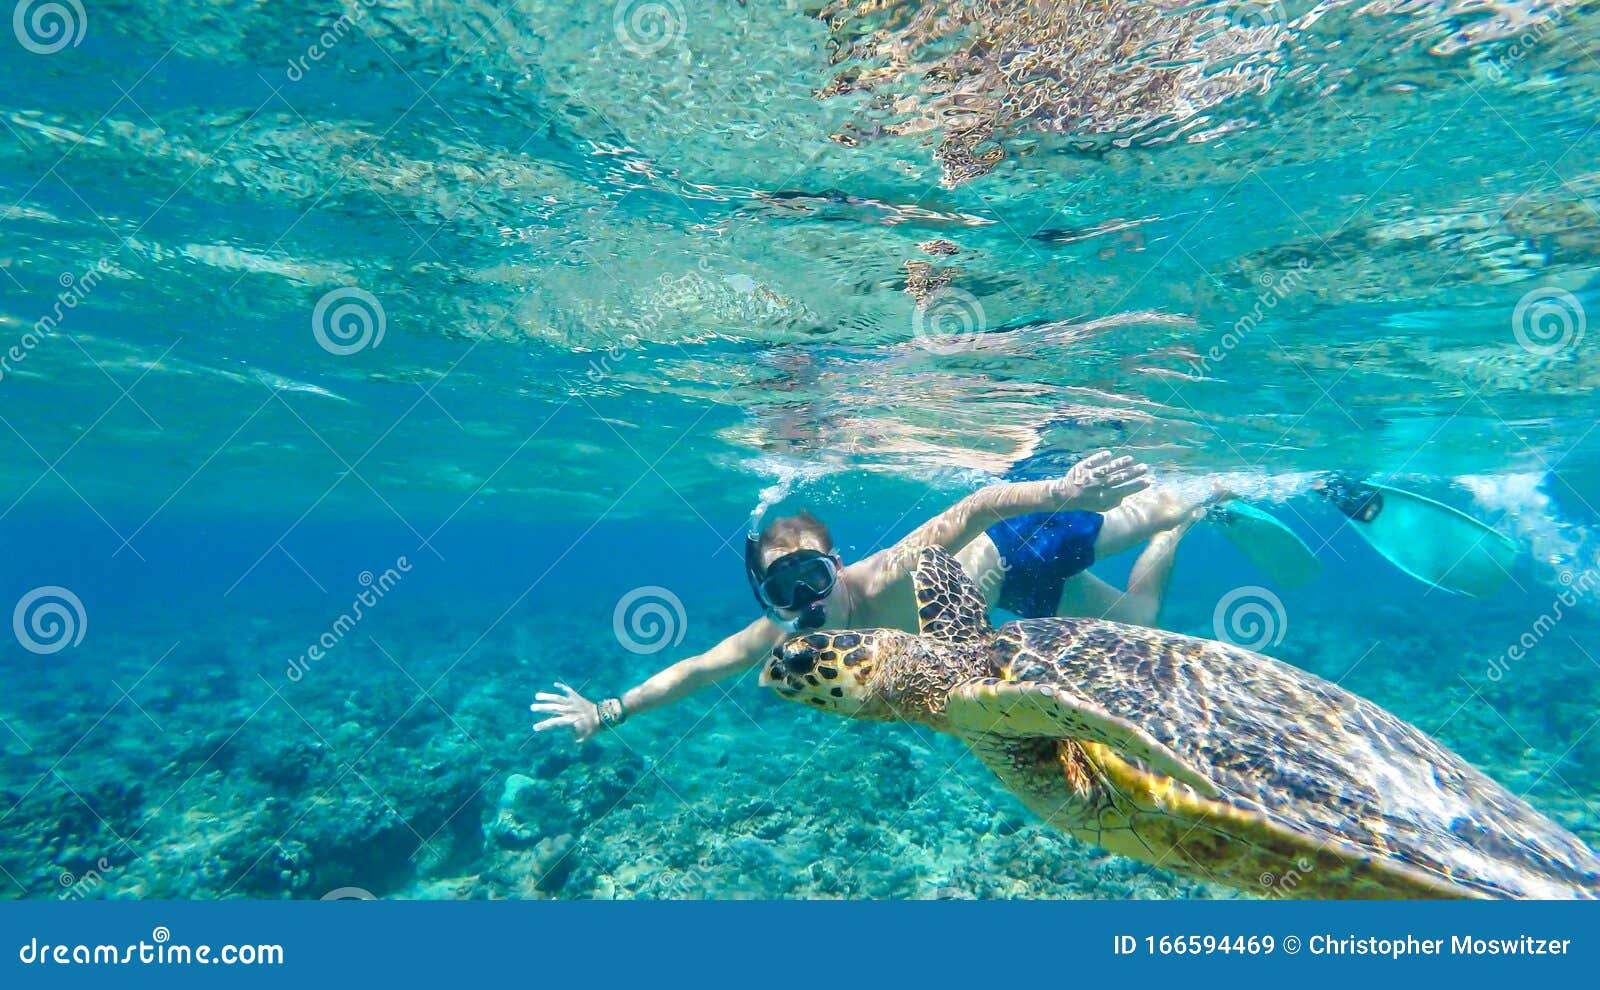 gili island - a man diving with turtle